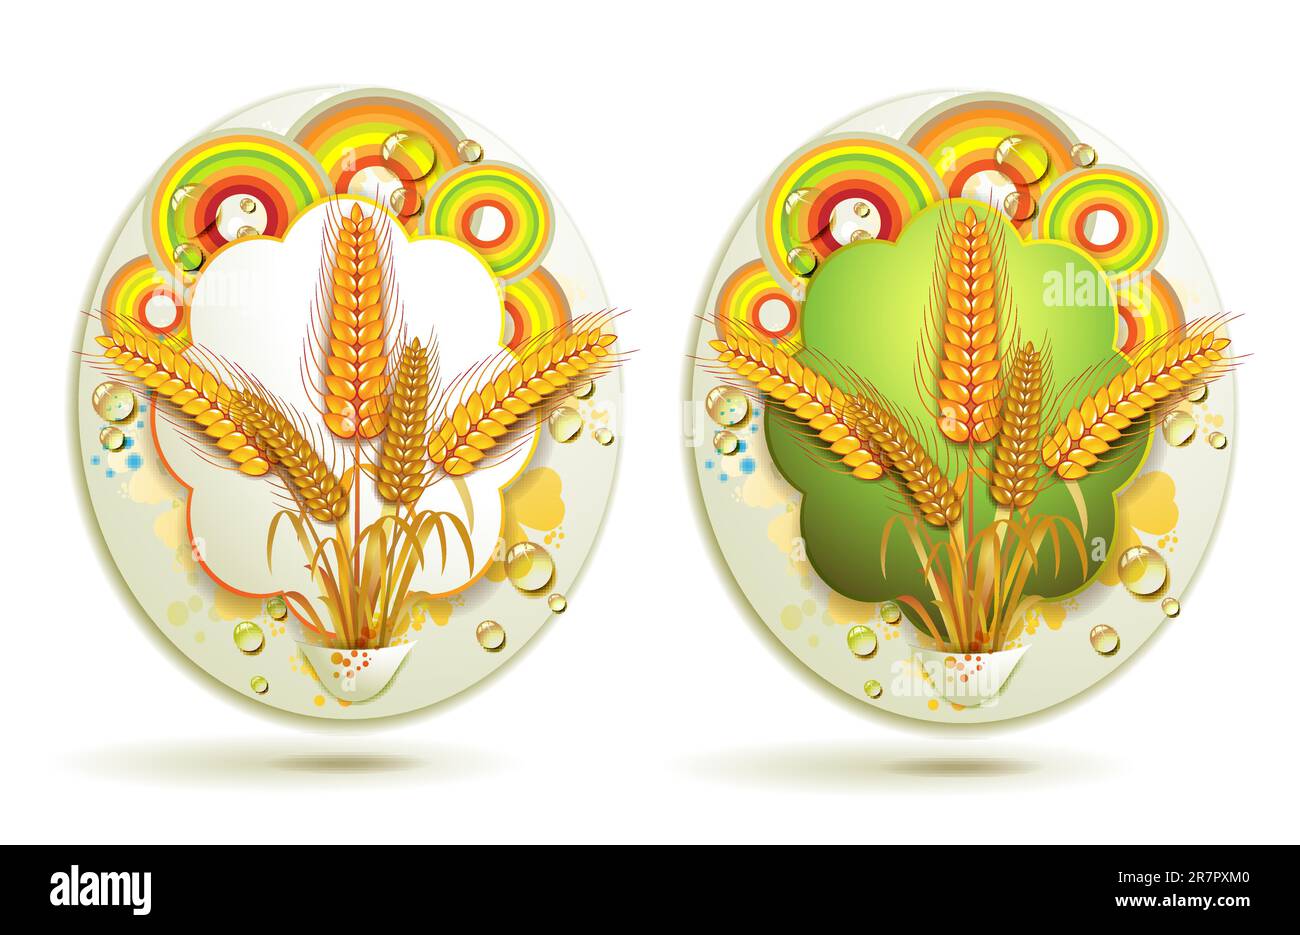 Wheat ears with colored circles Stock Vector